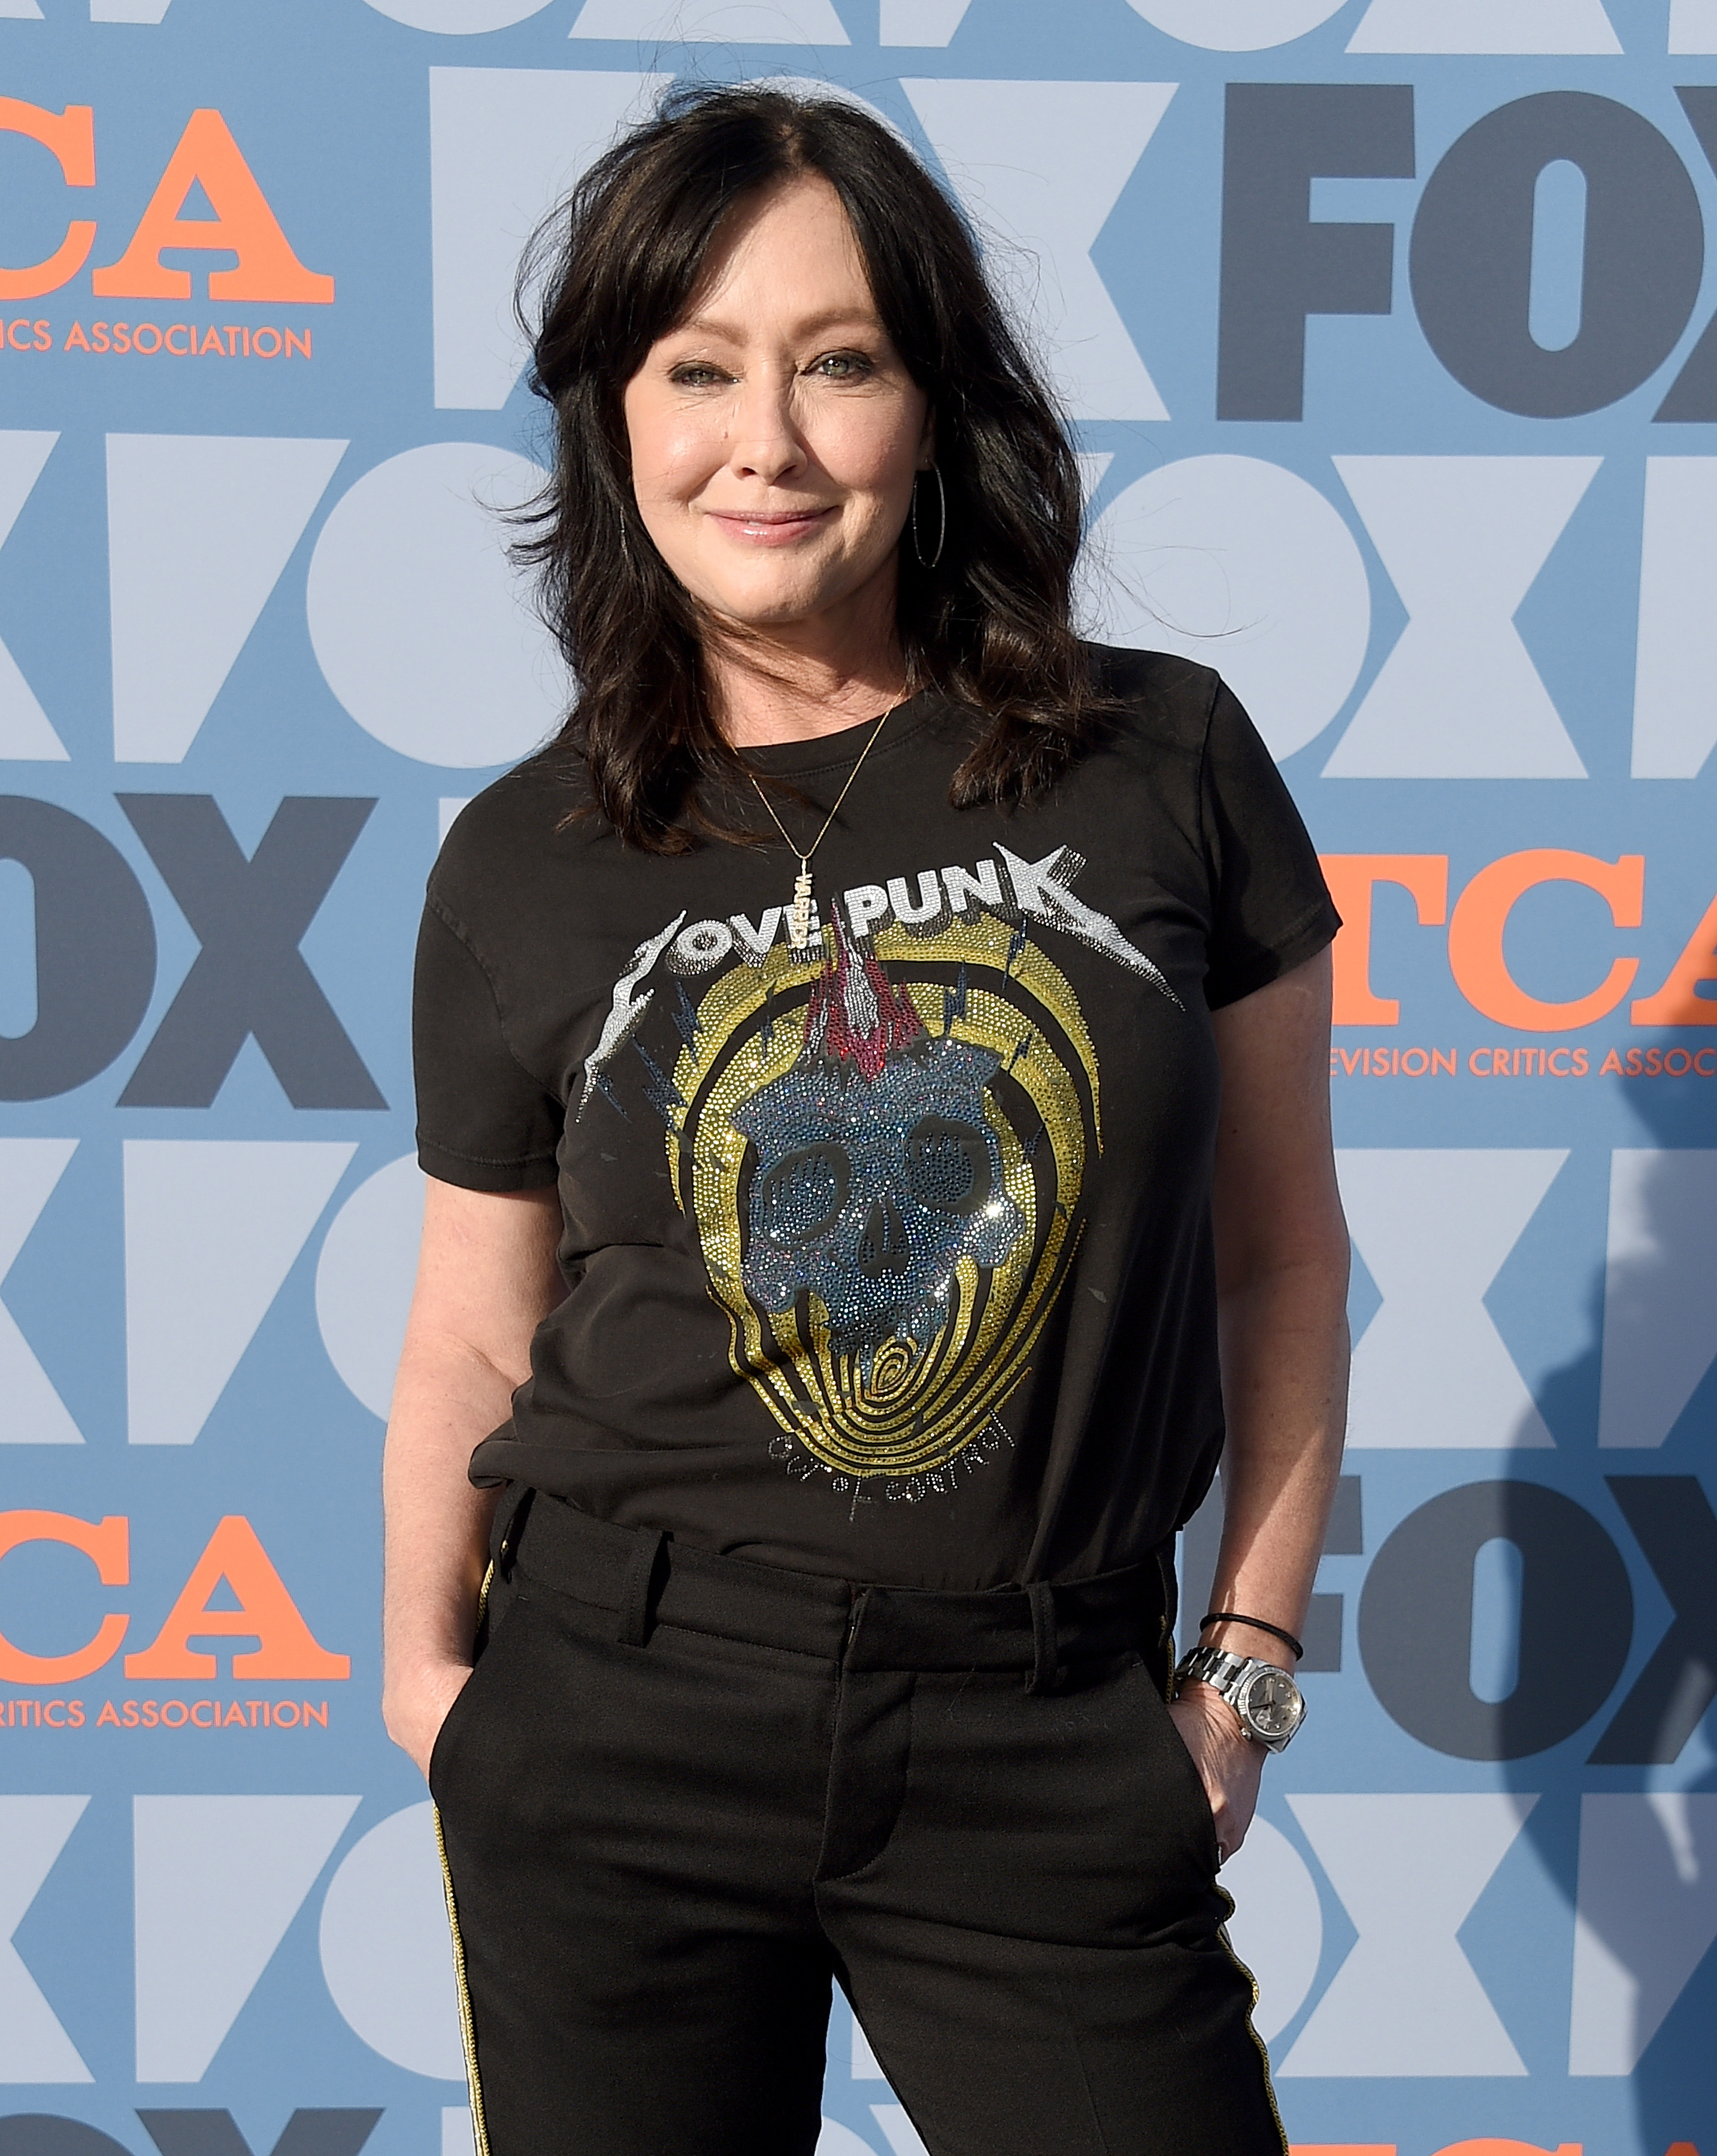 Shannen Doherty arrives at the FOX Summer TCA 2019 All-Star Party at Fox Studios in Los Angeles, California on August 7, 2019 | Source: Getty Images